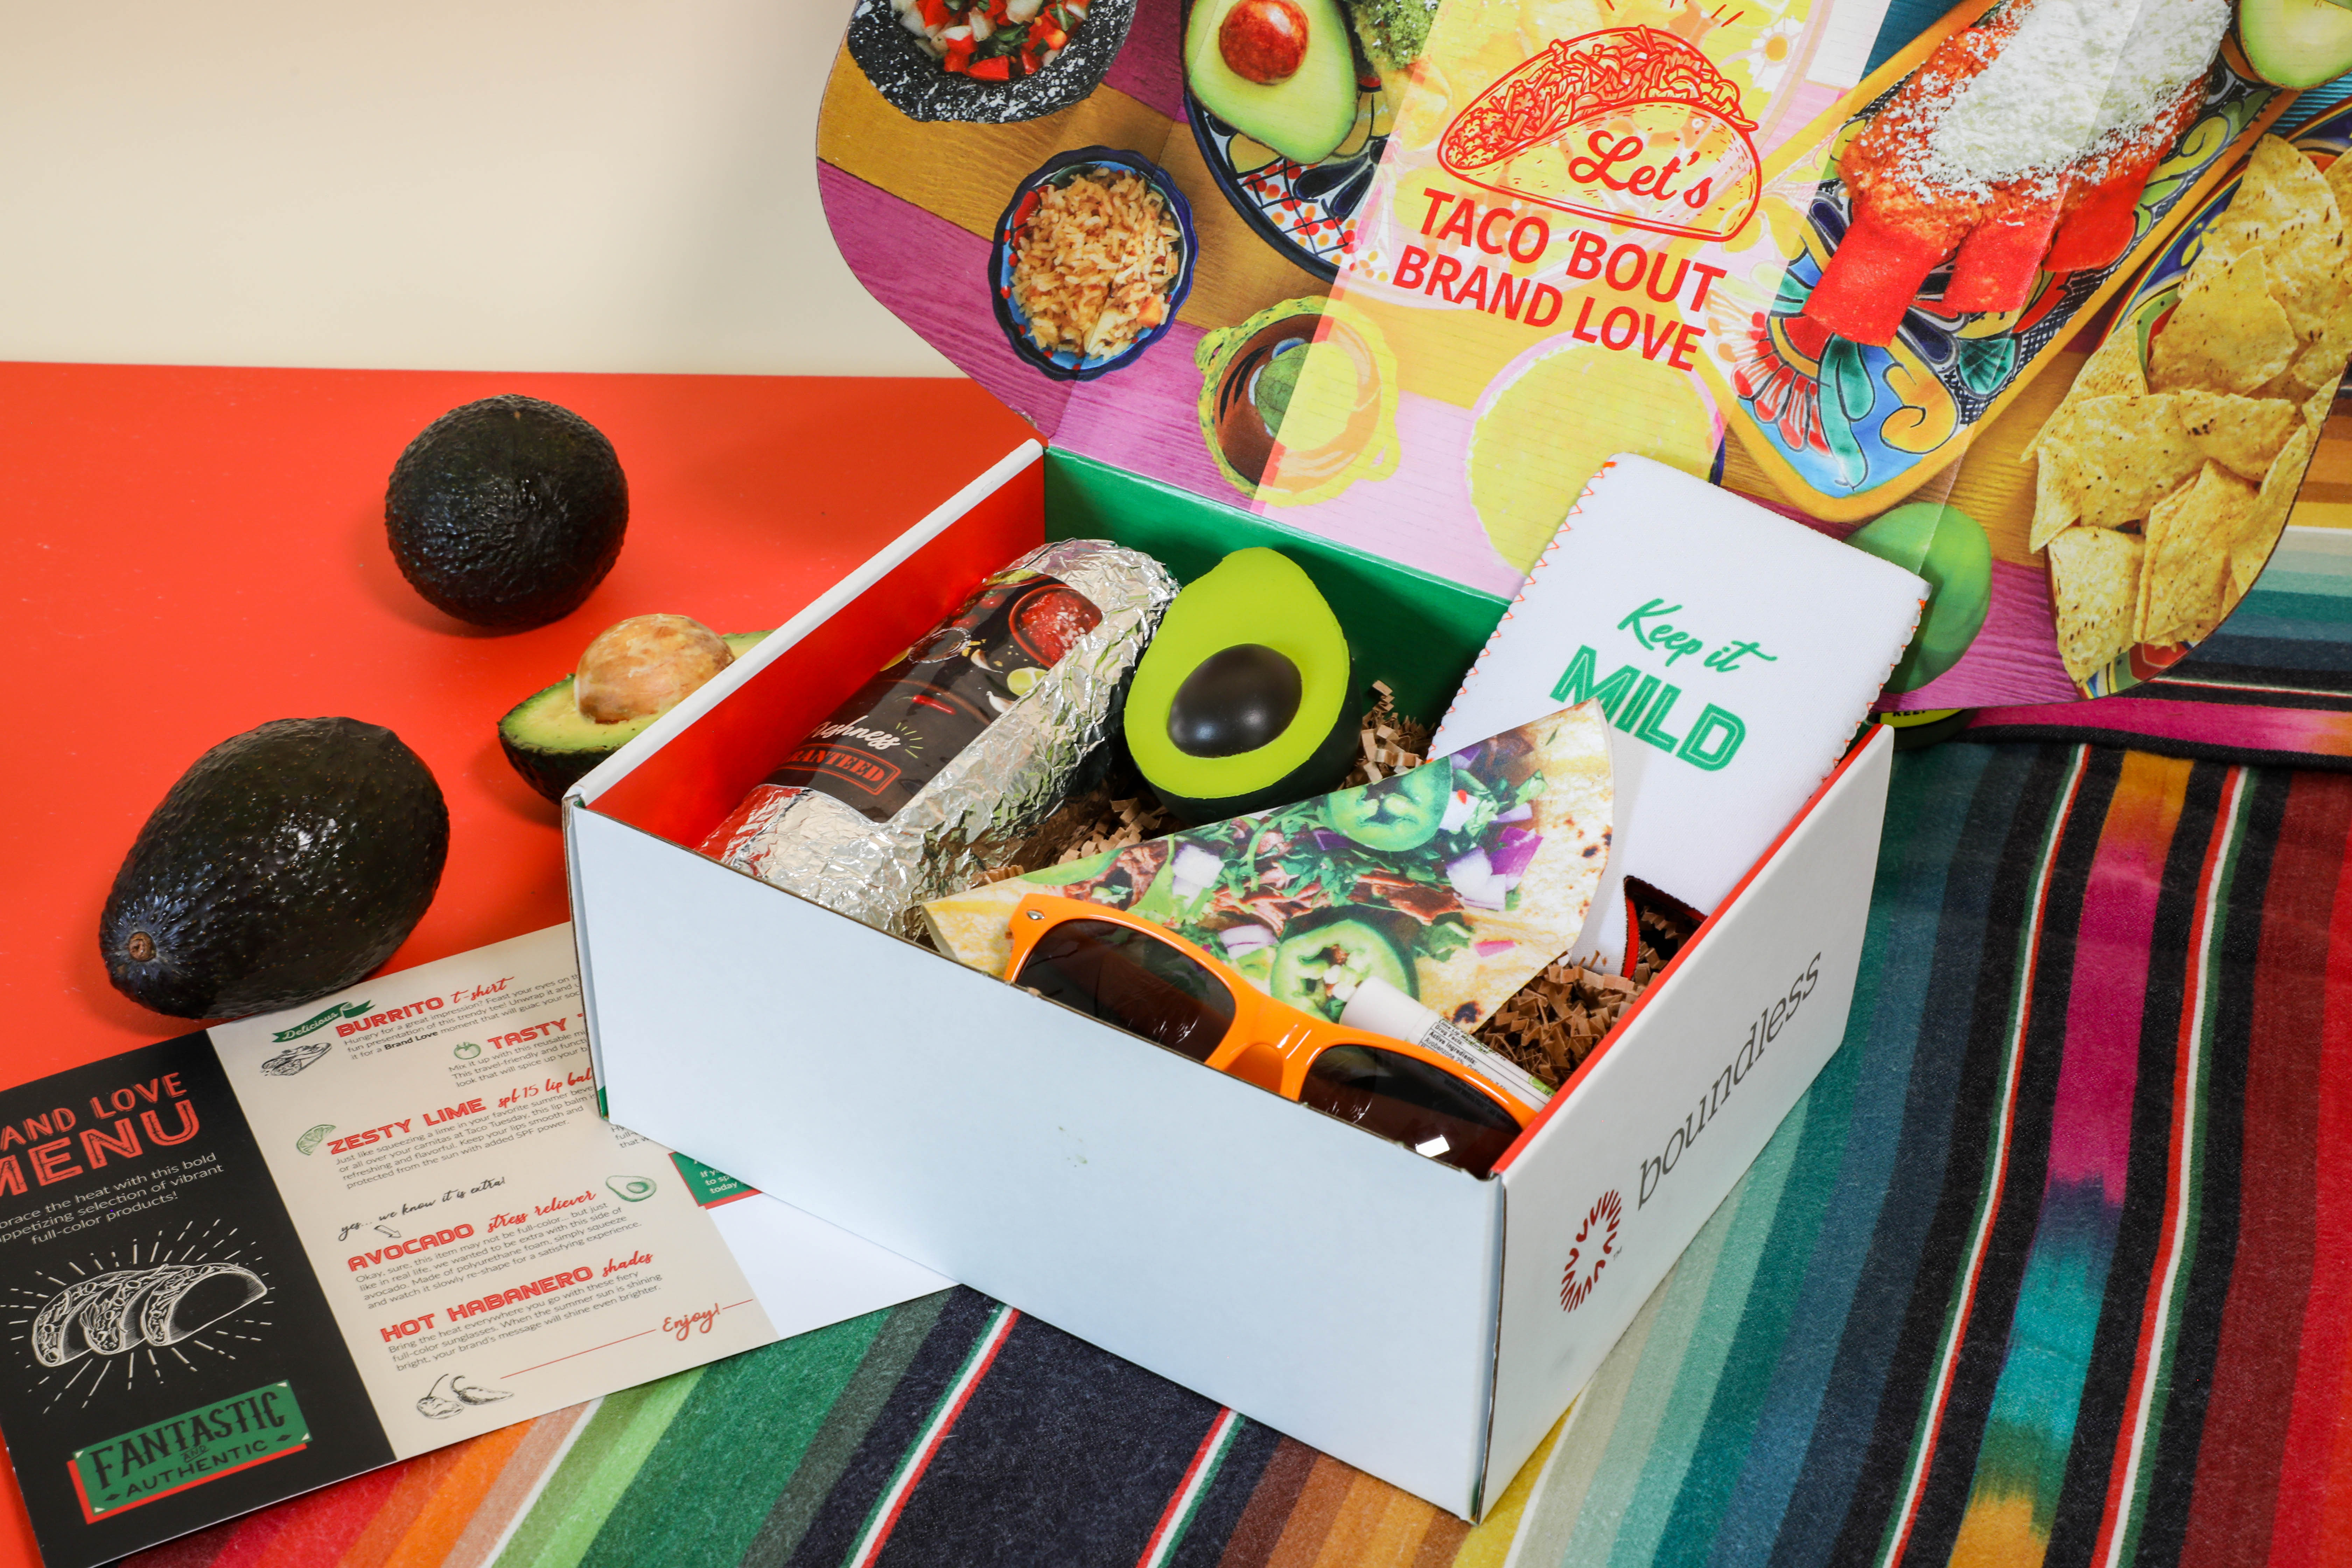 Taco brand box with products